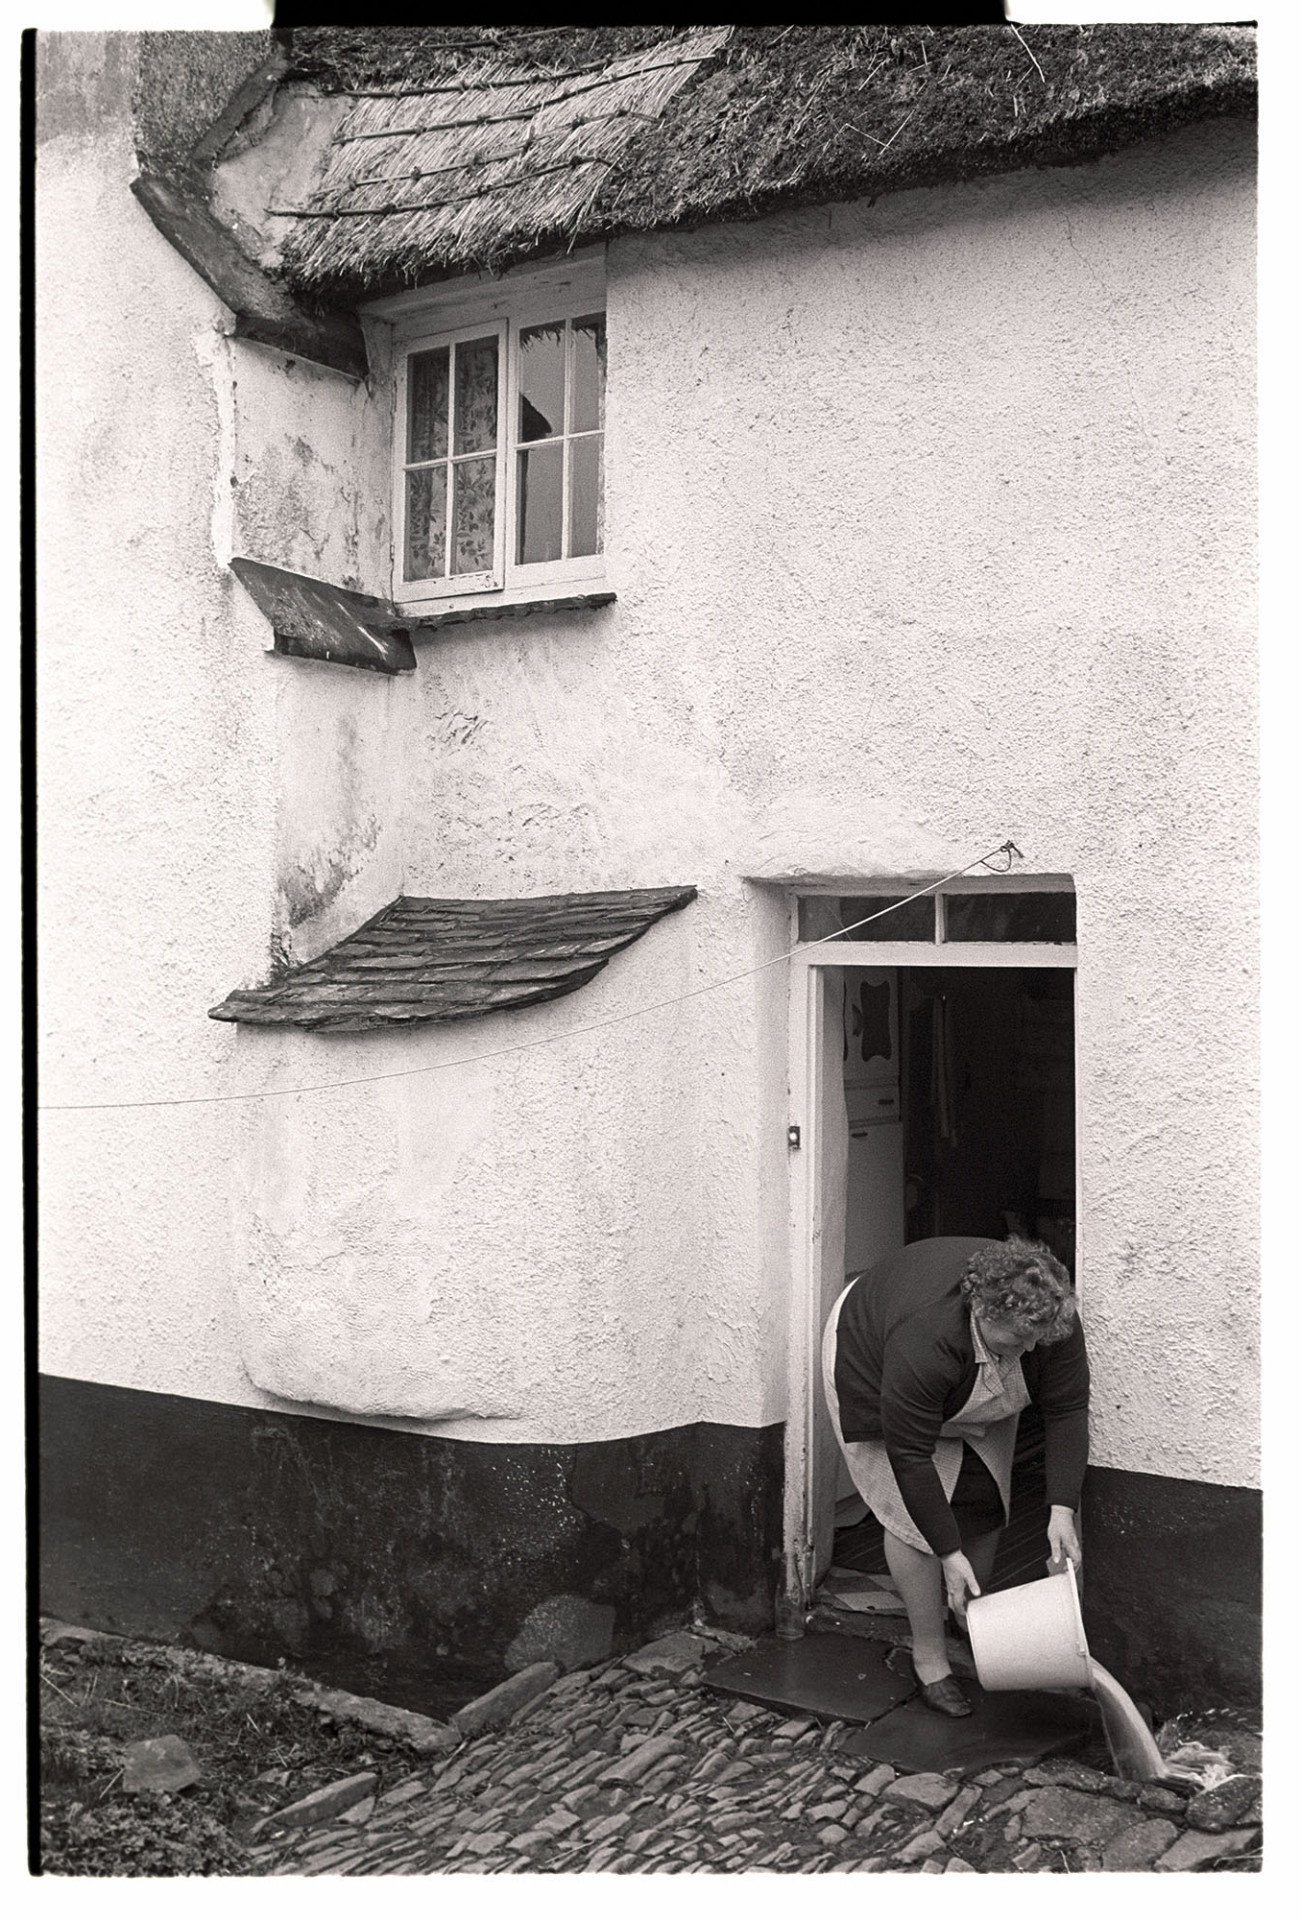 Woman pouring water down drain at back of cob and thatch cottage, see later pic 2080-12. 
[A woman empting a bucket of water down a drain by cobbles at the back of a cob and thatched cottage in Beaford. See also reference RAV/01/2080/12,]